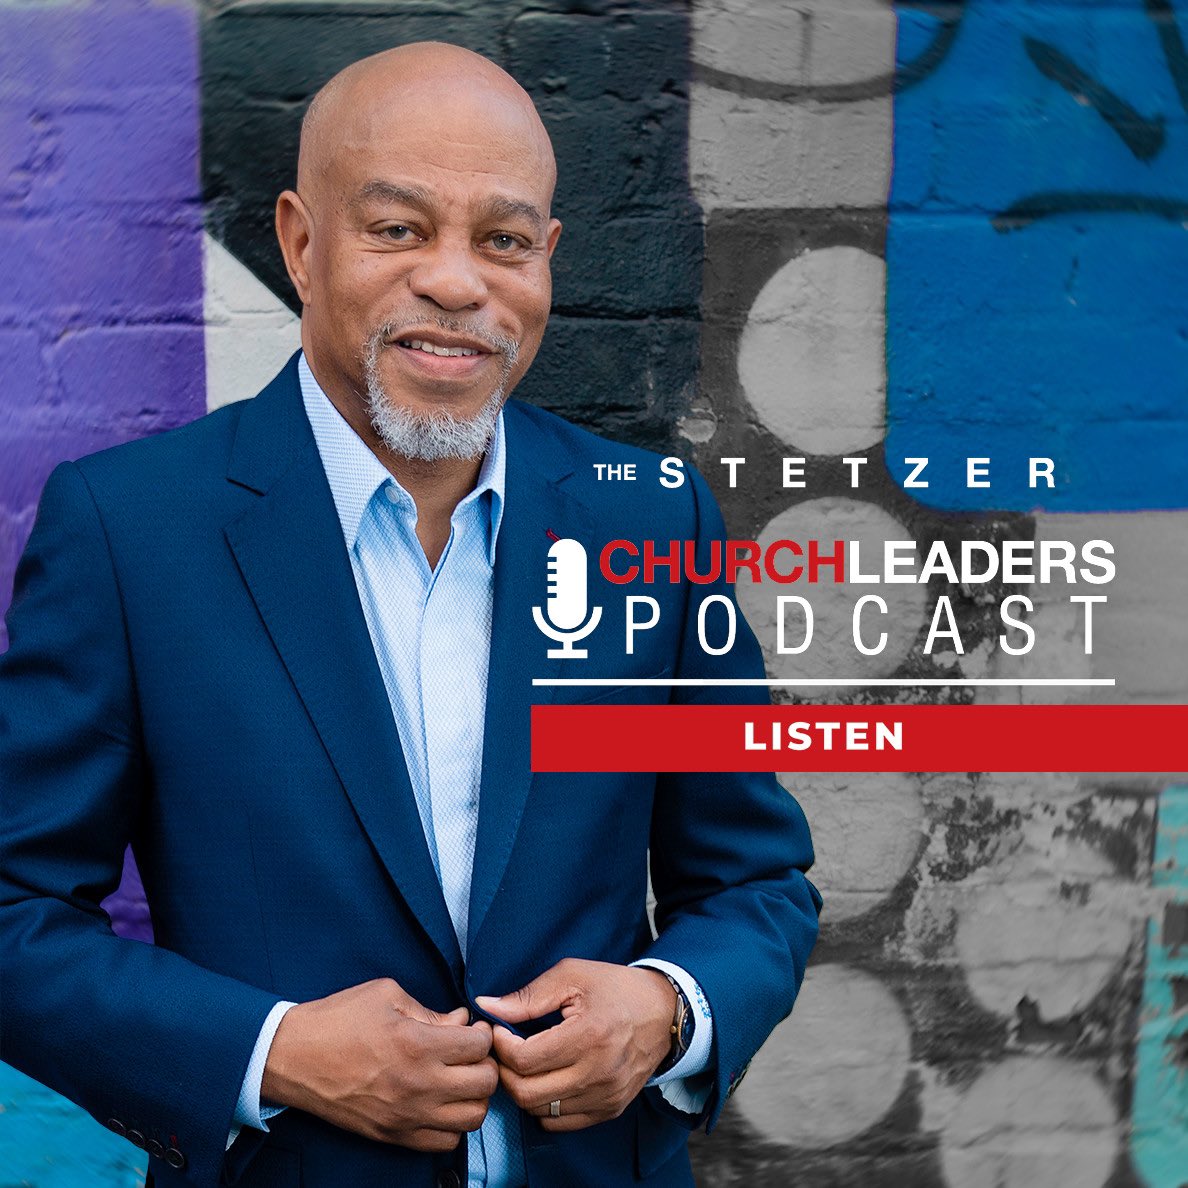 Thank you @edstetzer! It was an honor to join you on your podcast. The importance of integrity and executing a mission and a vision is so important in today's ministry. Please tune into the episode by searching The Stetzer ChurchLeaders Podcast on Apple Podcast!